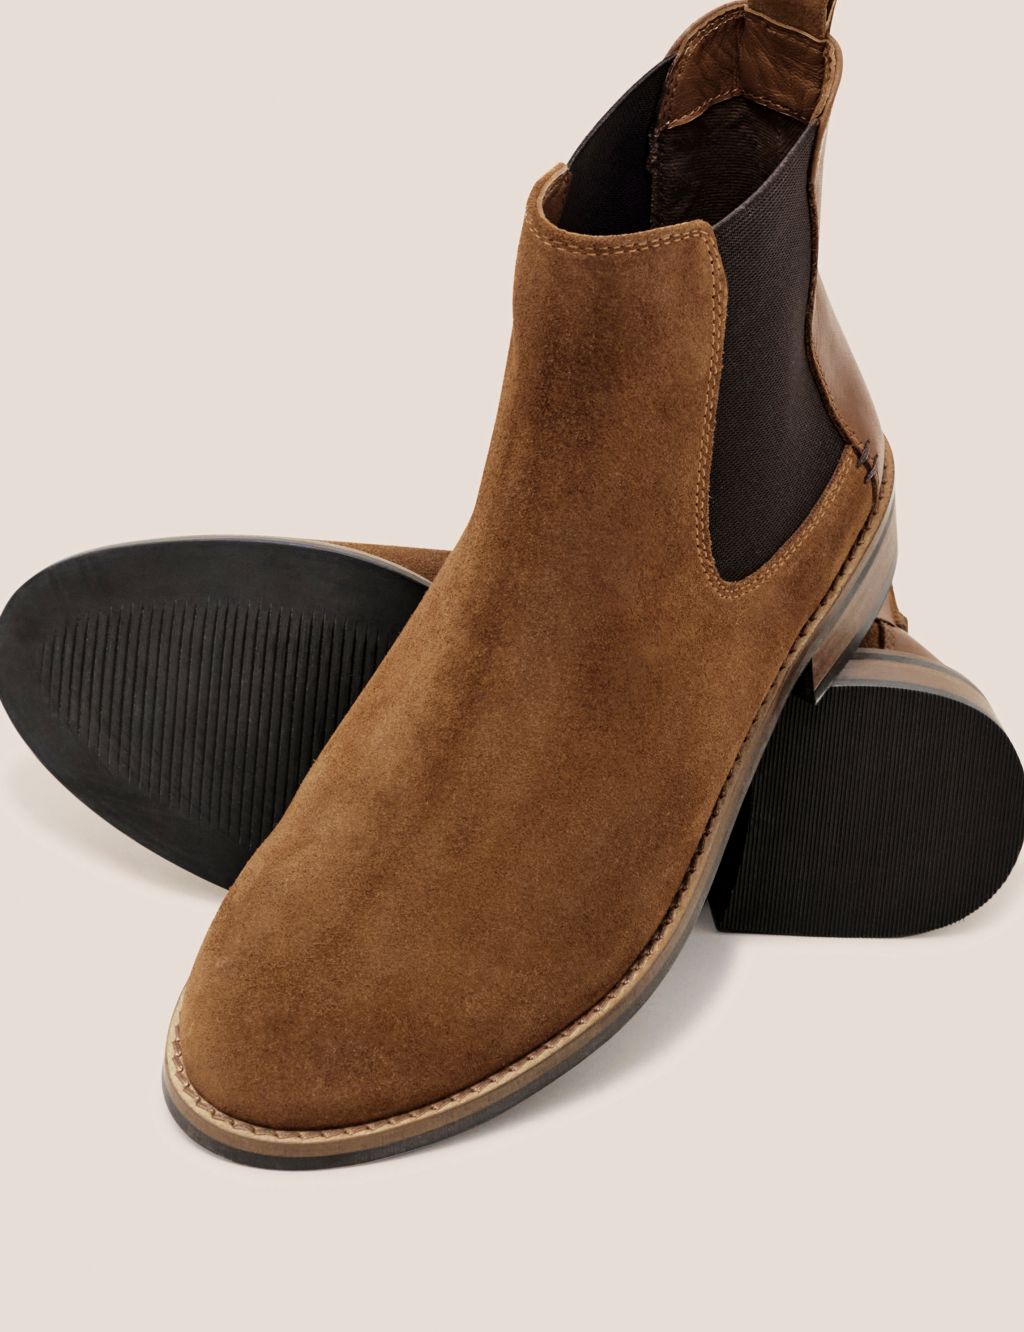 Suede Chelsea Flat Ankle Boots image 3